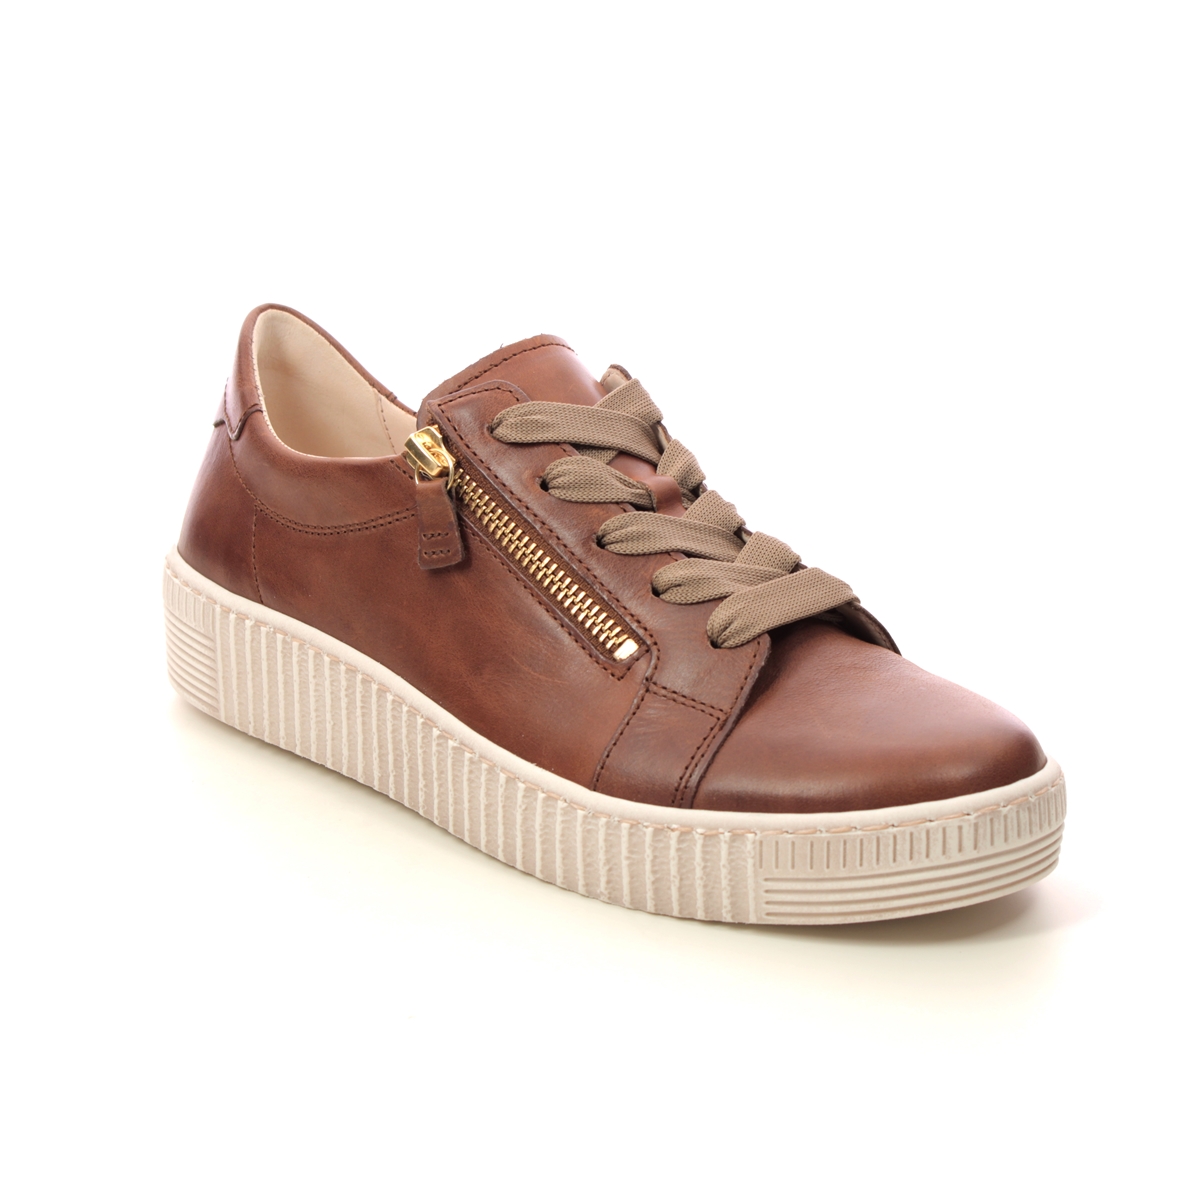 Gabor Wisdom Tan Leather Womens Trainers 93.334.24 In Size 4.5 In Plain Tan Leather  Womens Trainers In Soft Tan Leather Leather